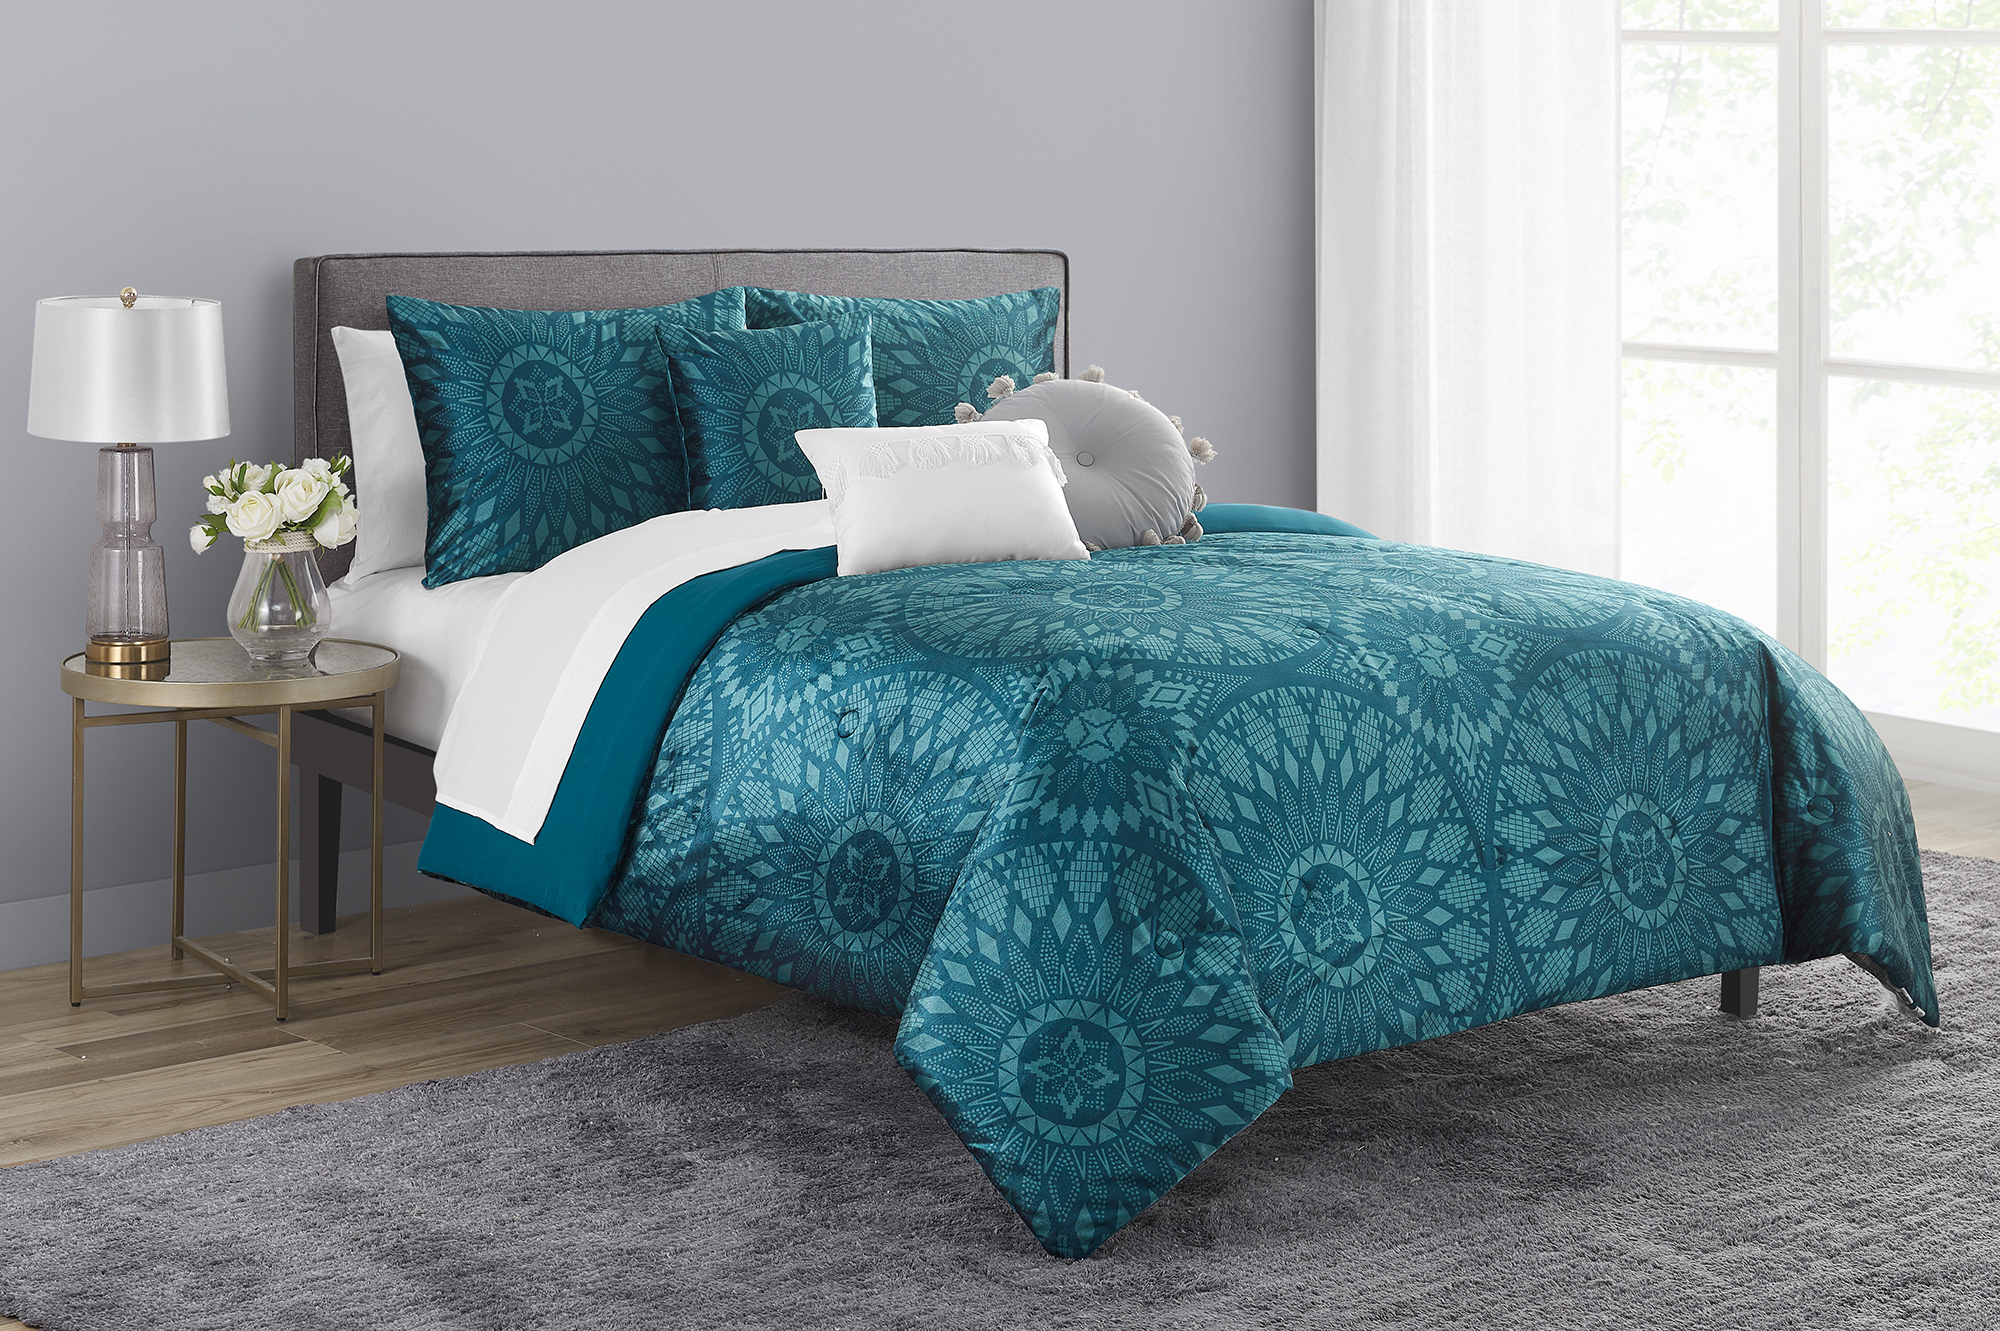 Mainstays Teal Velvet Medallion 10 Piece Bed in a Bag with Sheets and 3 DecPillows, Full - image 3 of 12